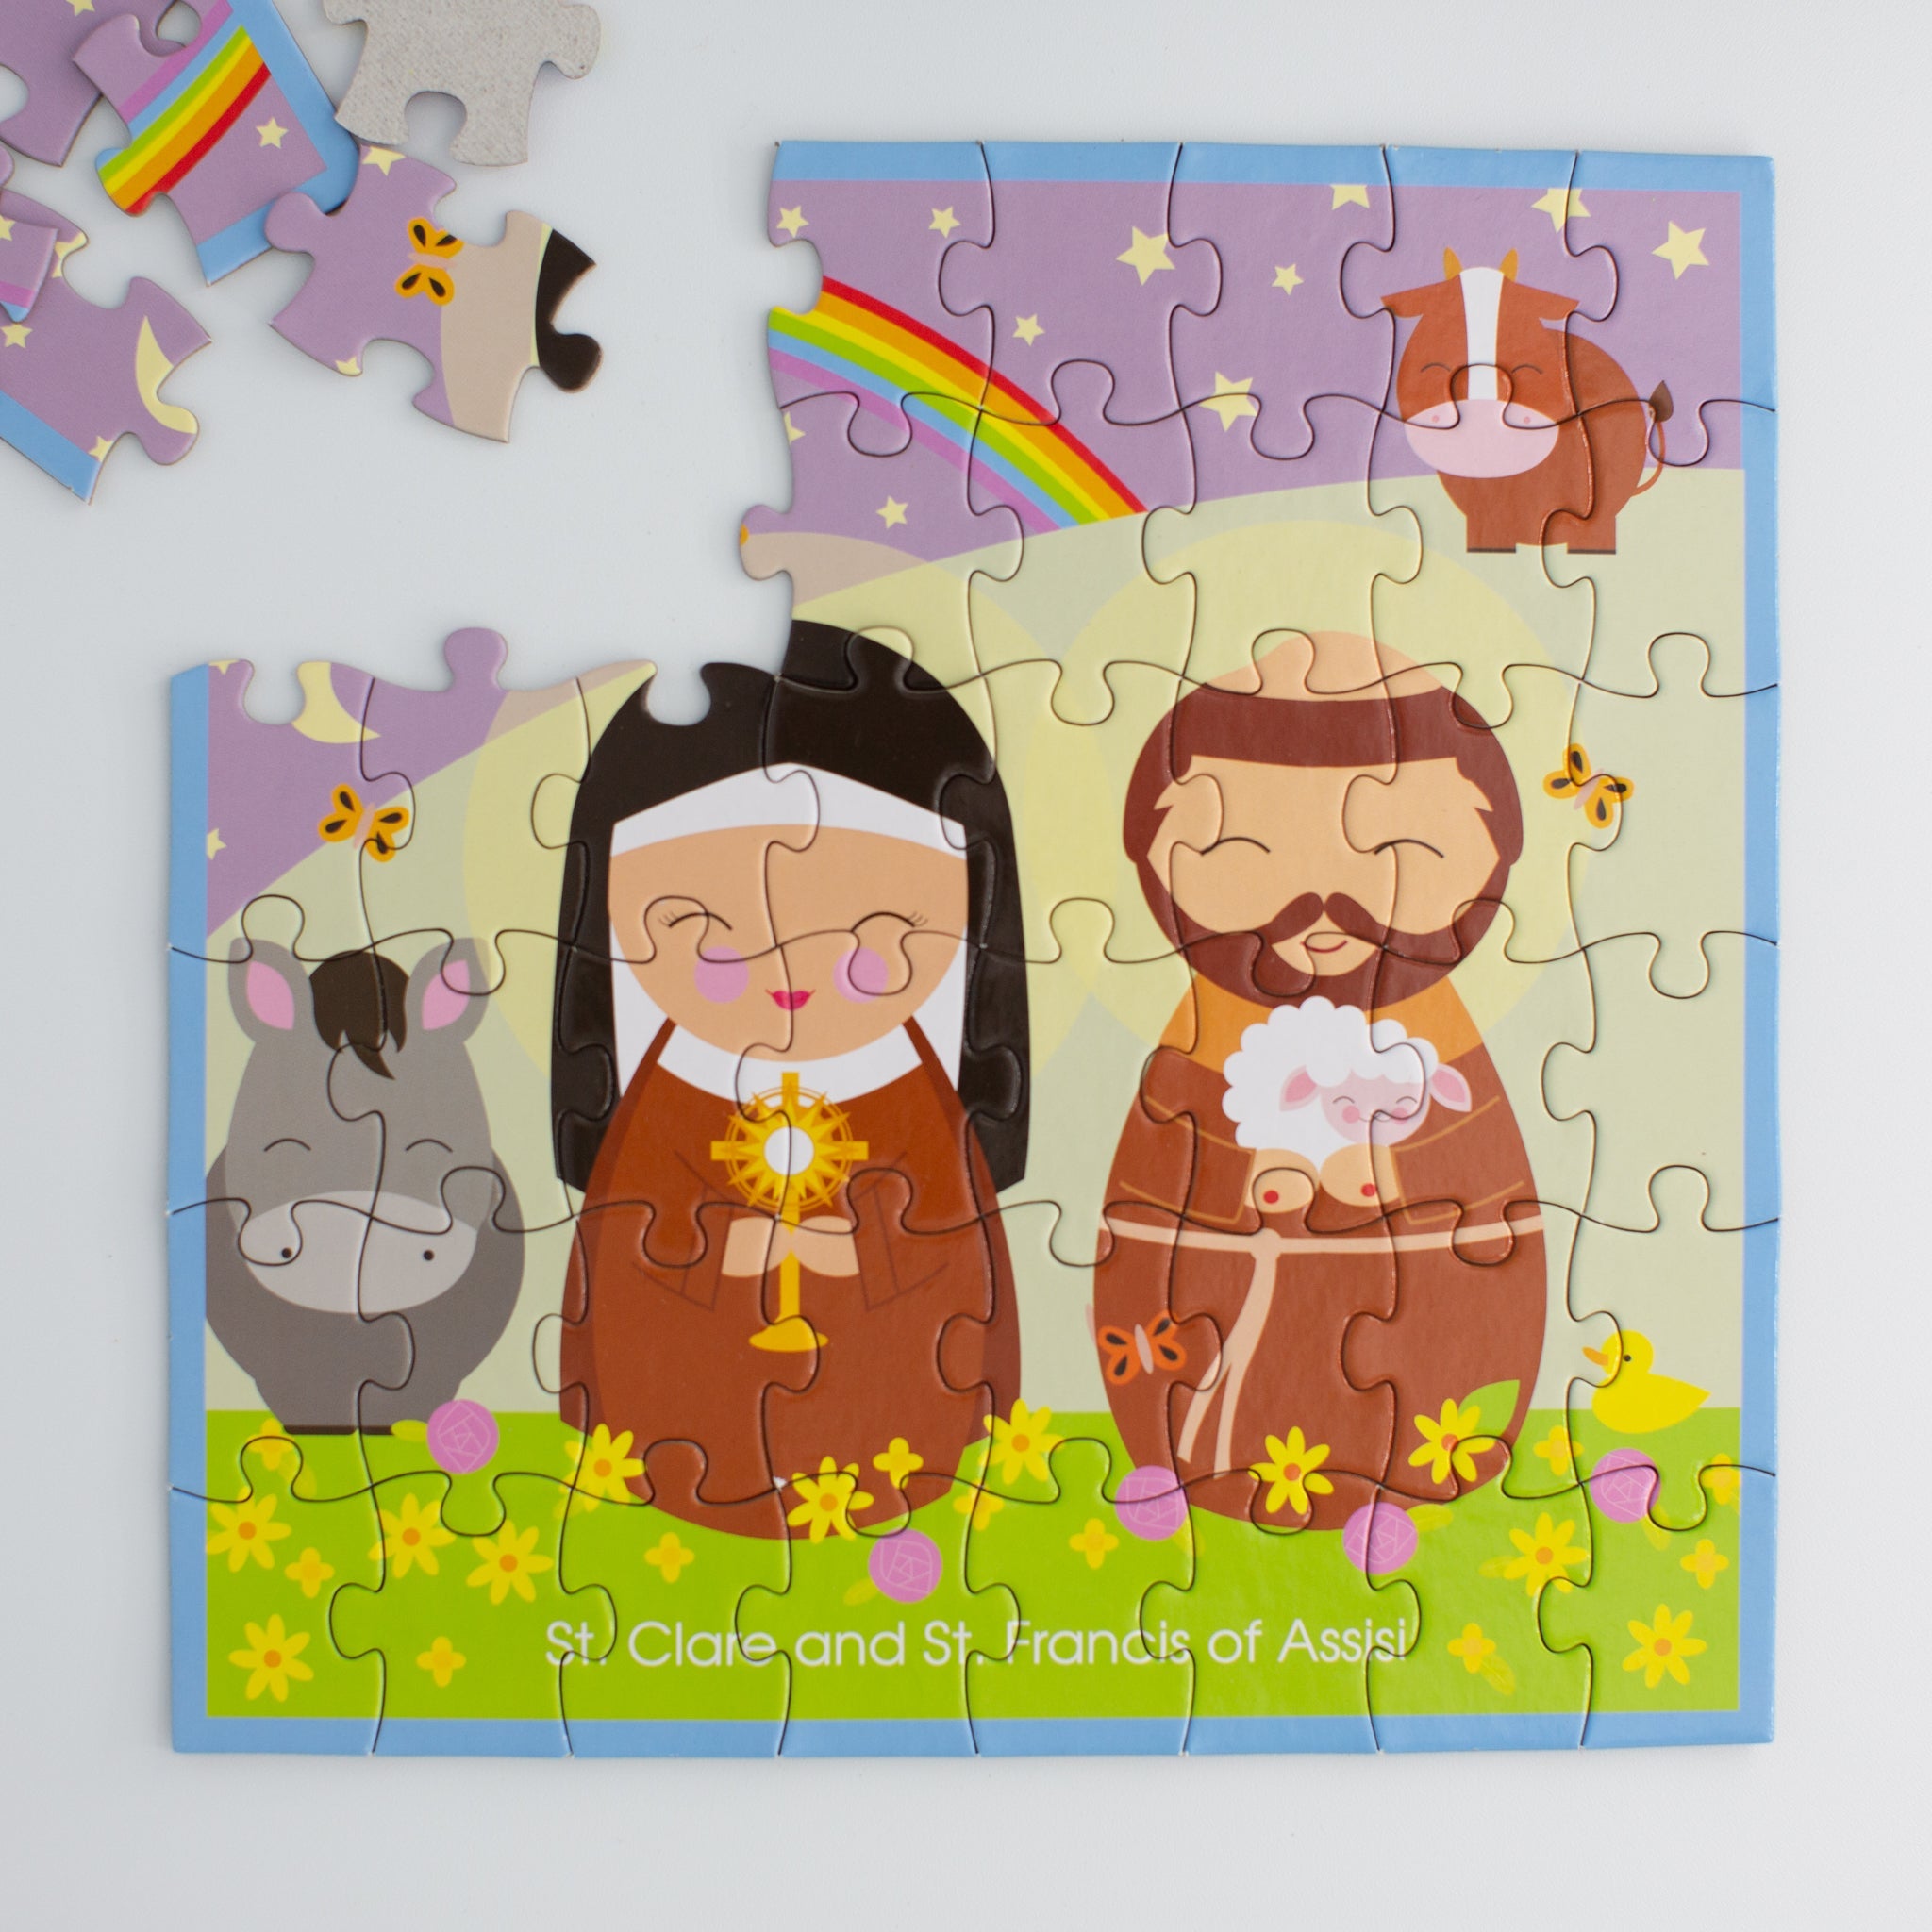 St. Clare And St. Francis Of Assisi Mini Puzzle